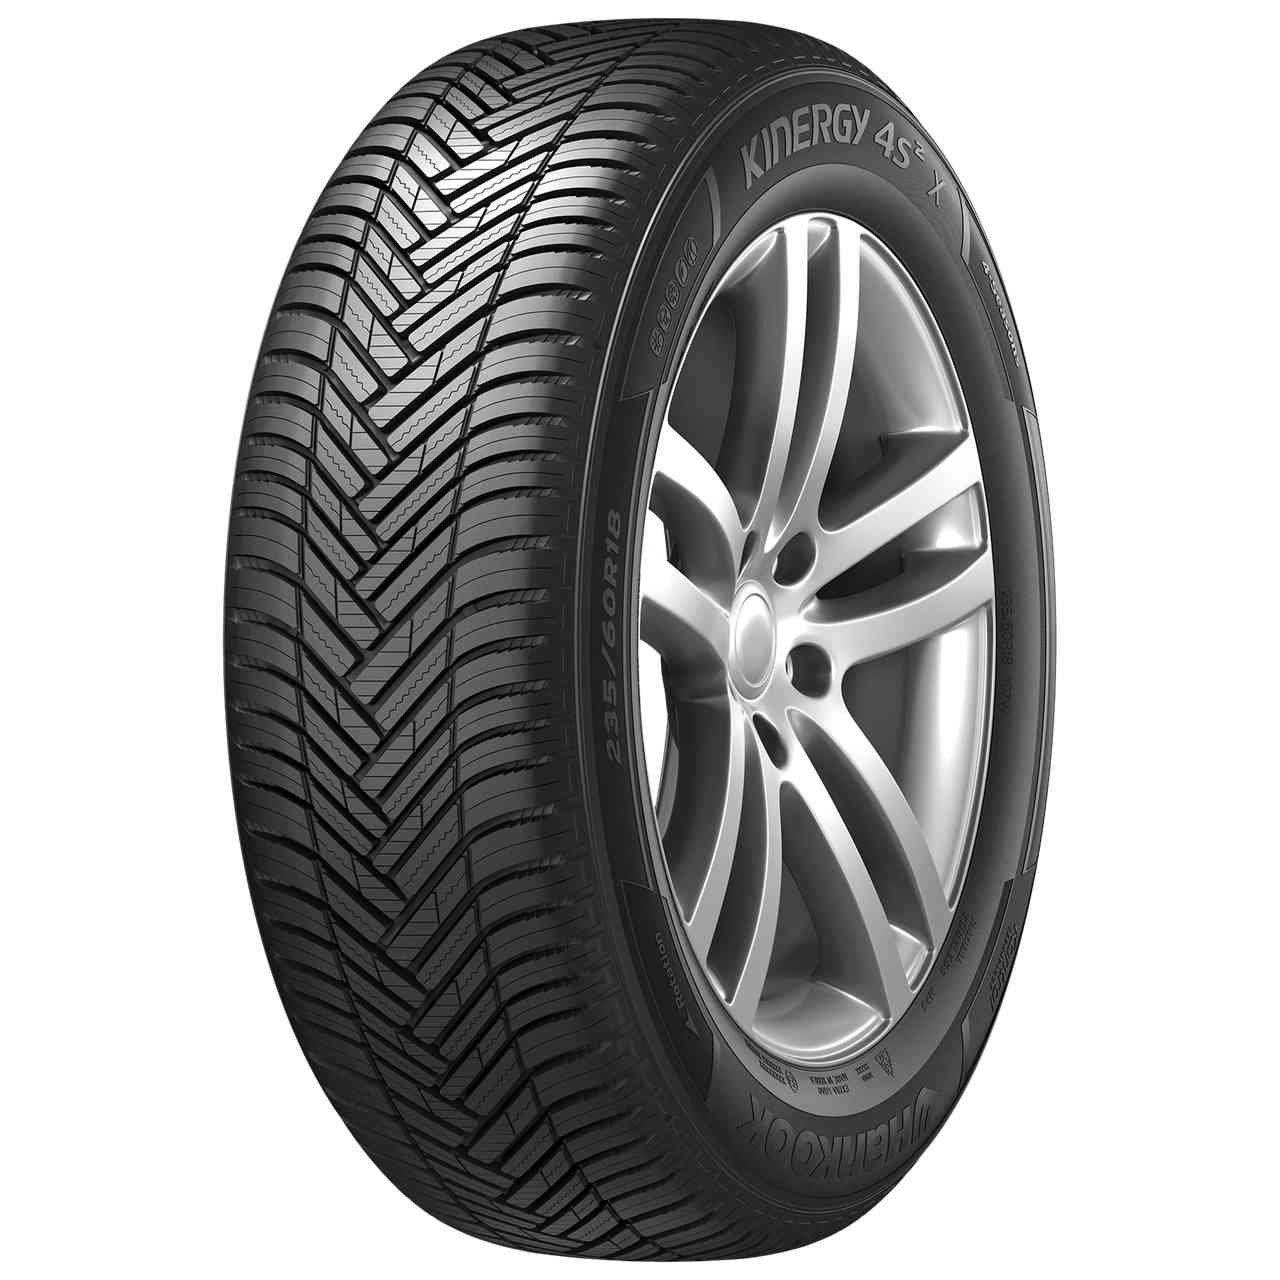 HANKOOK KINERGY 4S 2 X (H750A) 225/50R18 95V BSW